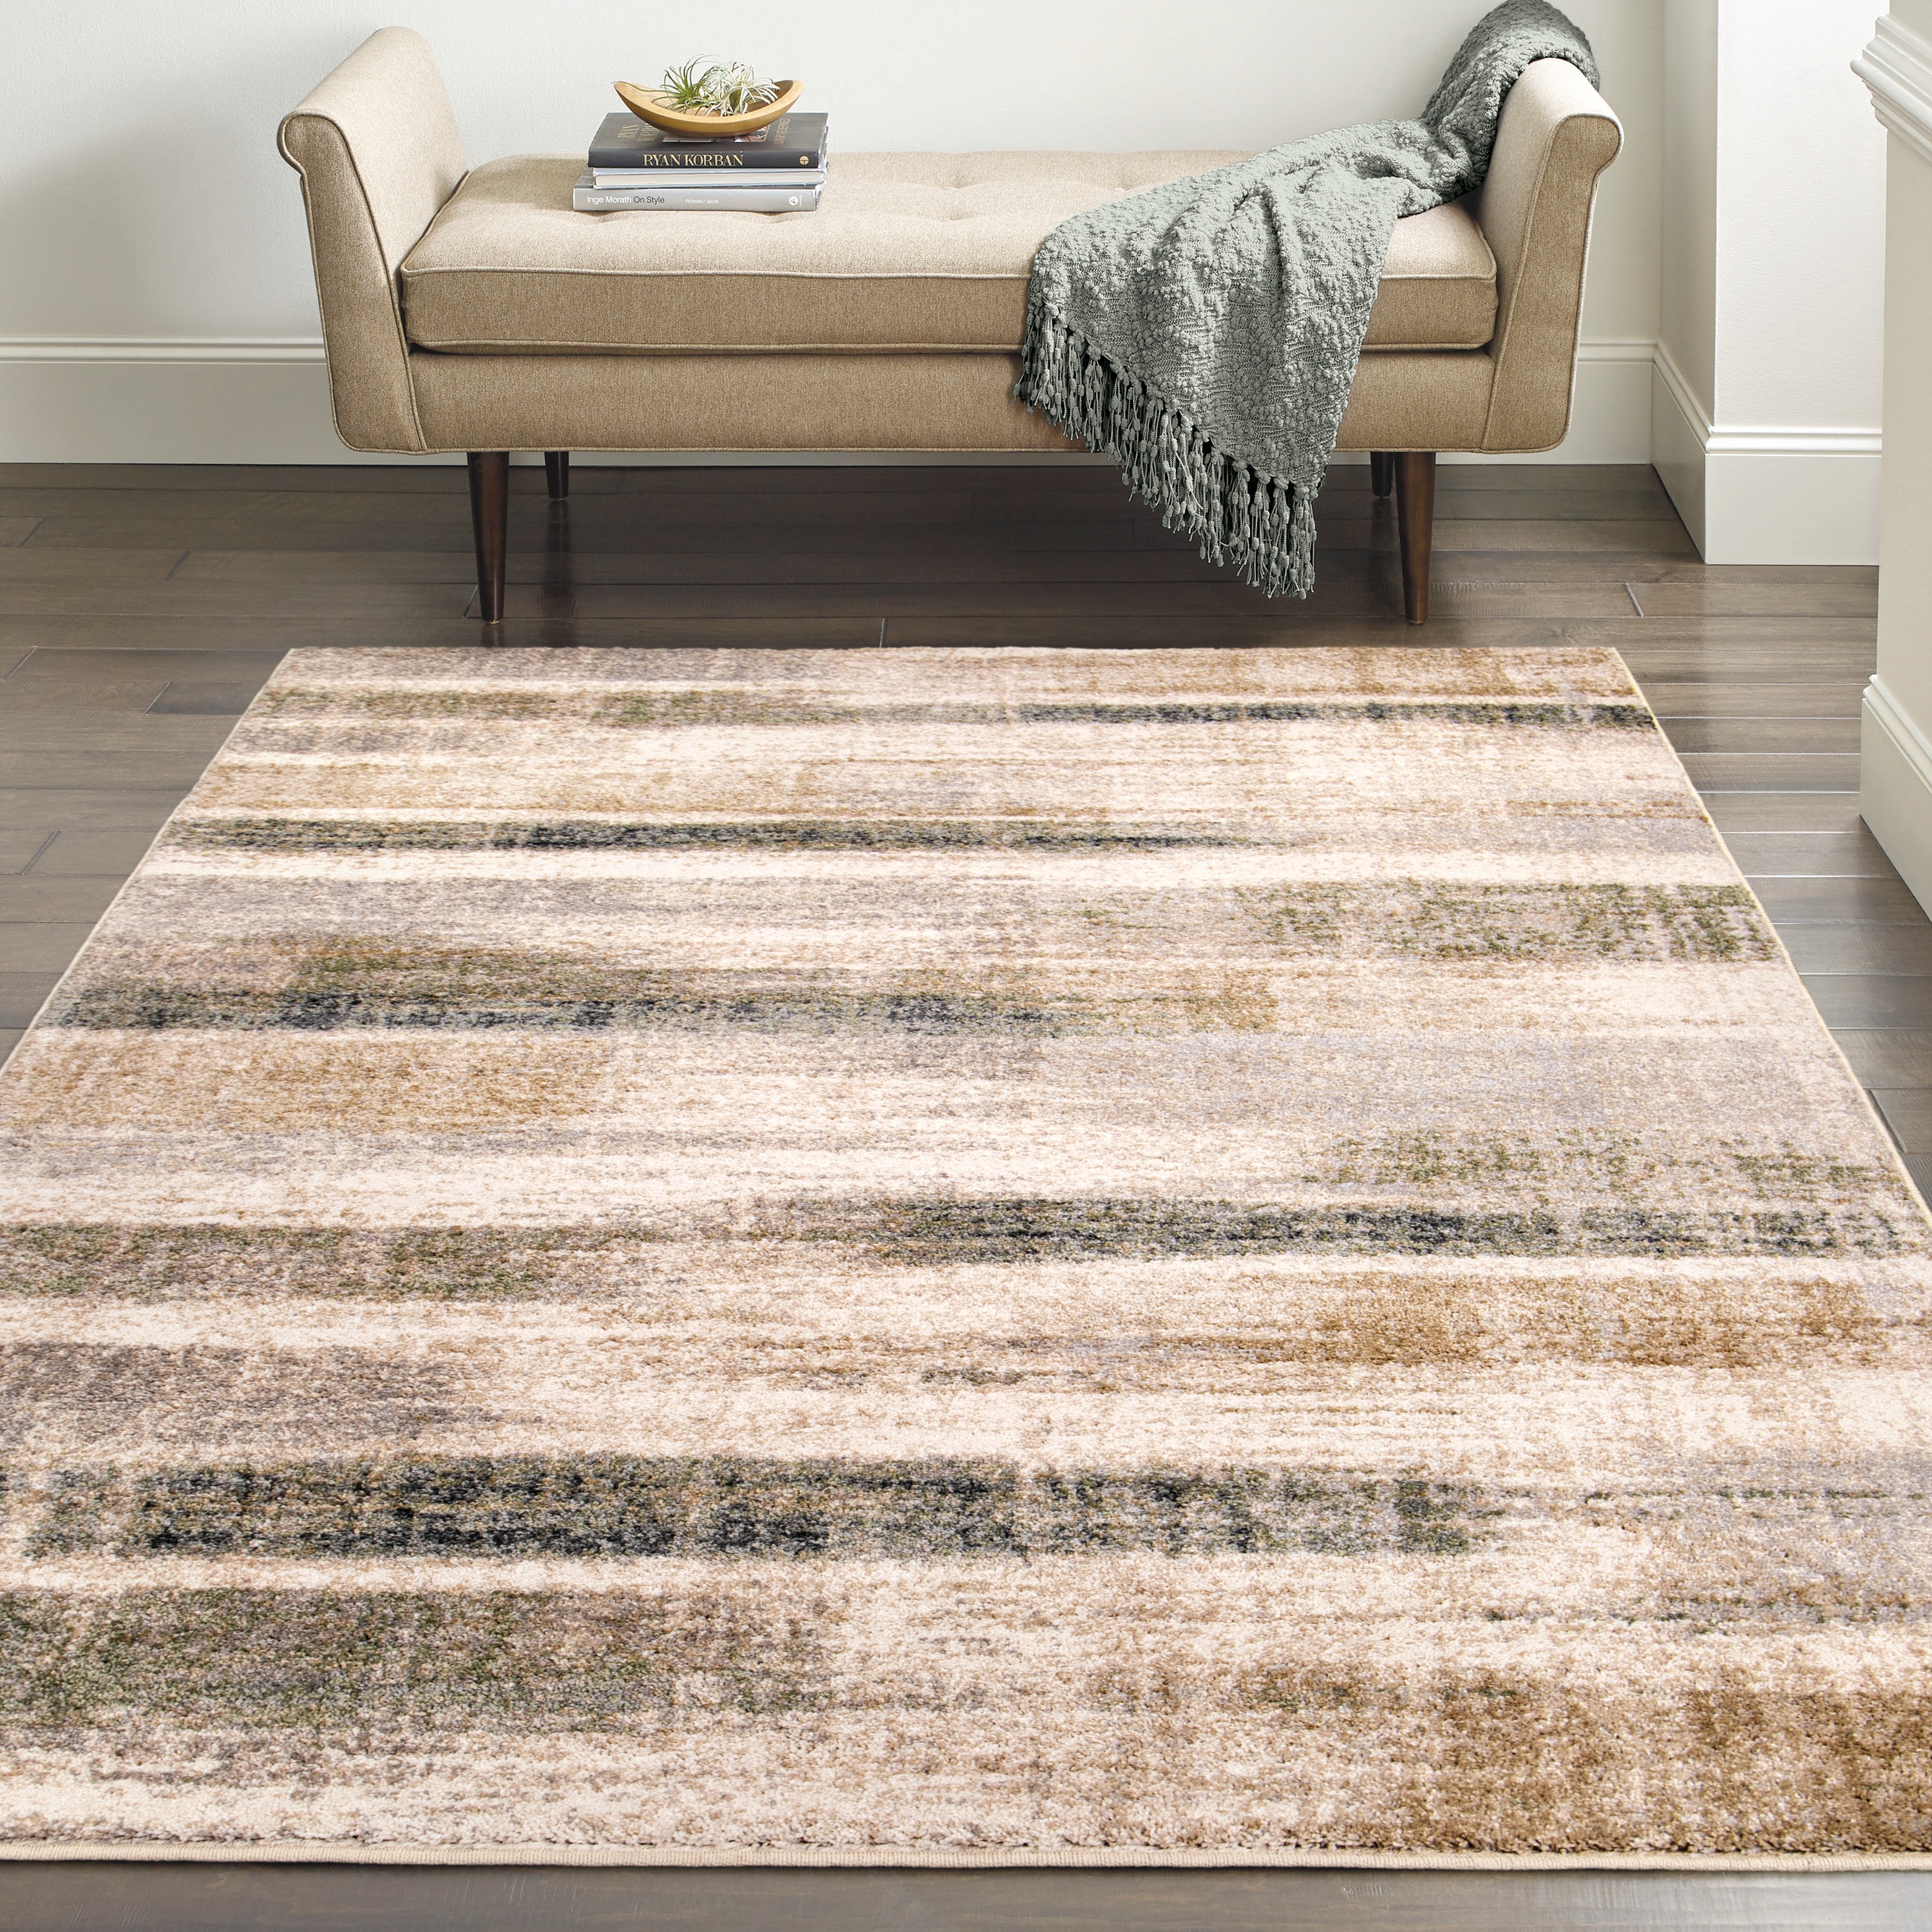 Affordable Farmhouse Style Area Rugs For Your Home